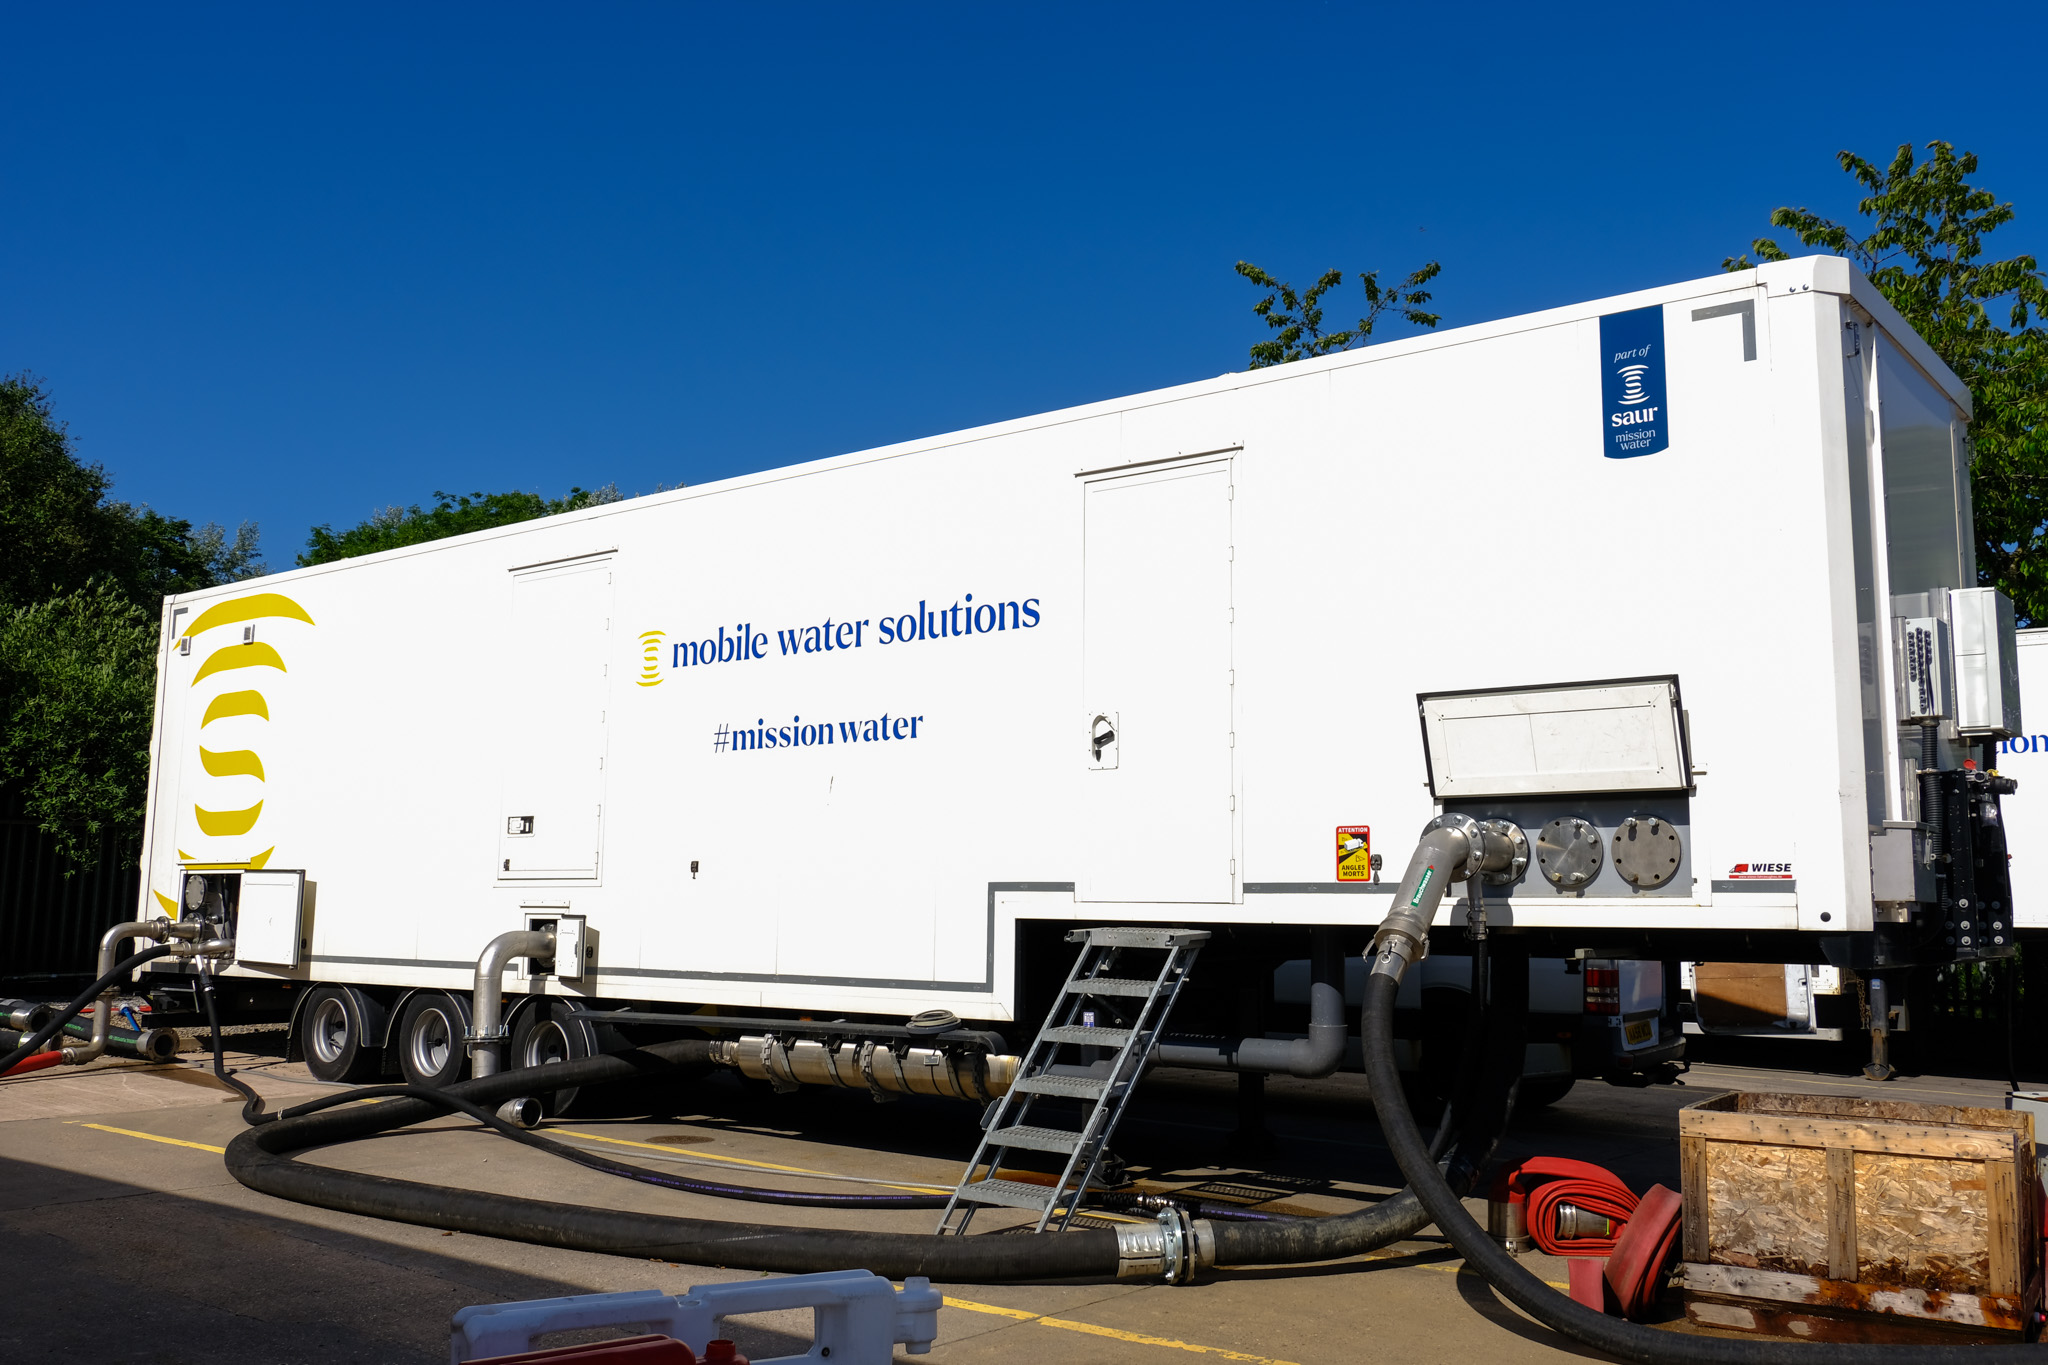 NSI Mobile Water Solutions | Water company | Water Treatment Plant | Water solutions for operators | water treatment technologies | Available for emergency calls 24/7 | Enhanced water management | industrial water treatment systems | Keep your production flowing | Easy integration to your plant | Talk to an expert today | Contact Us Today